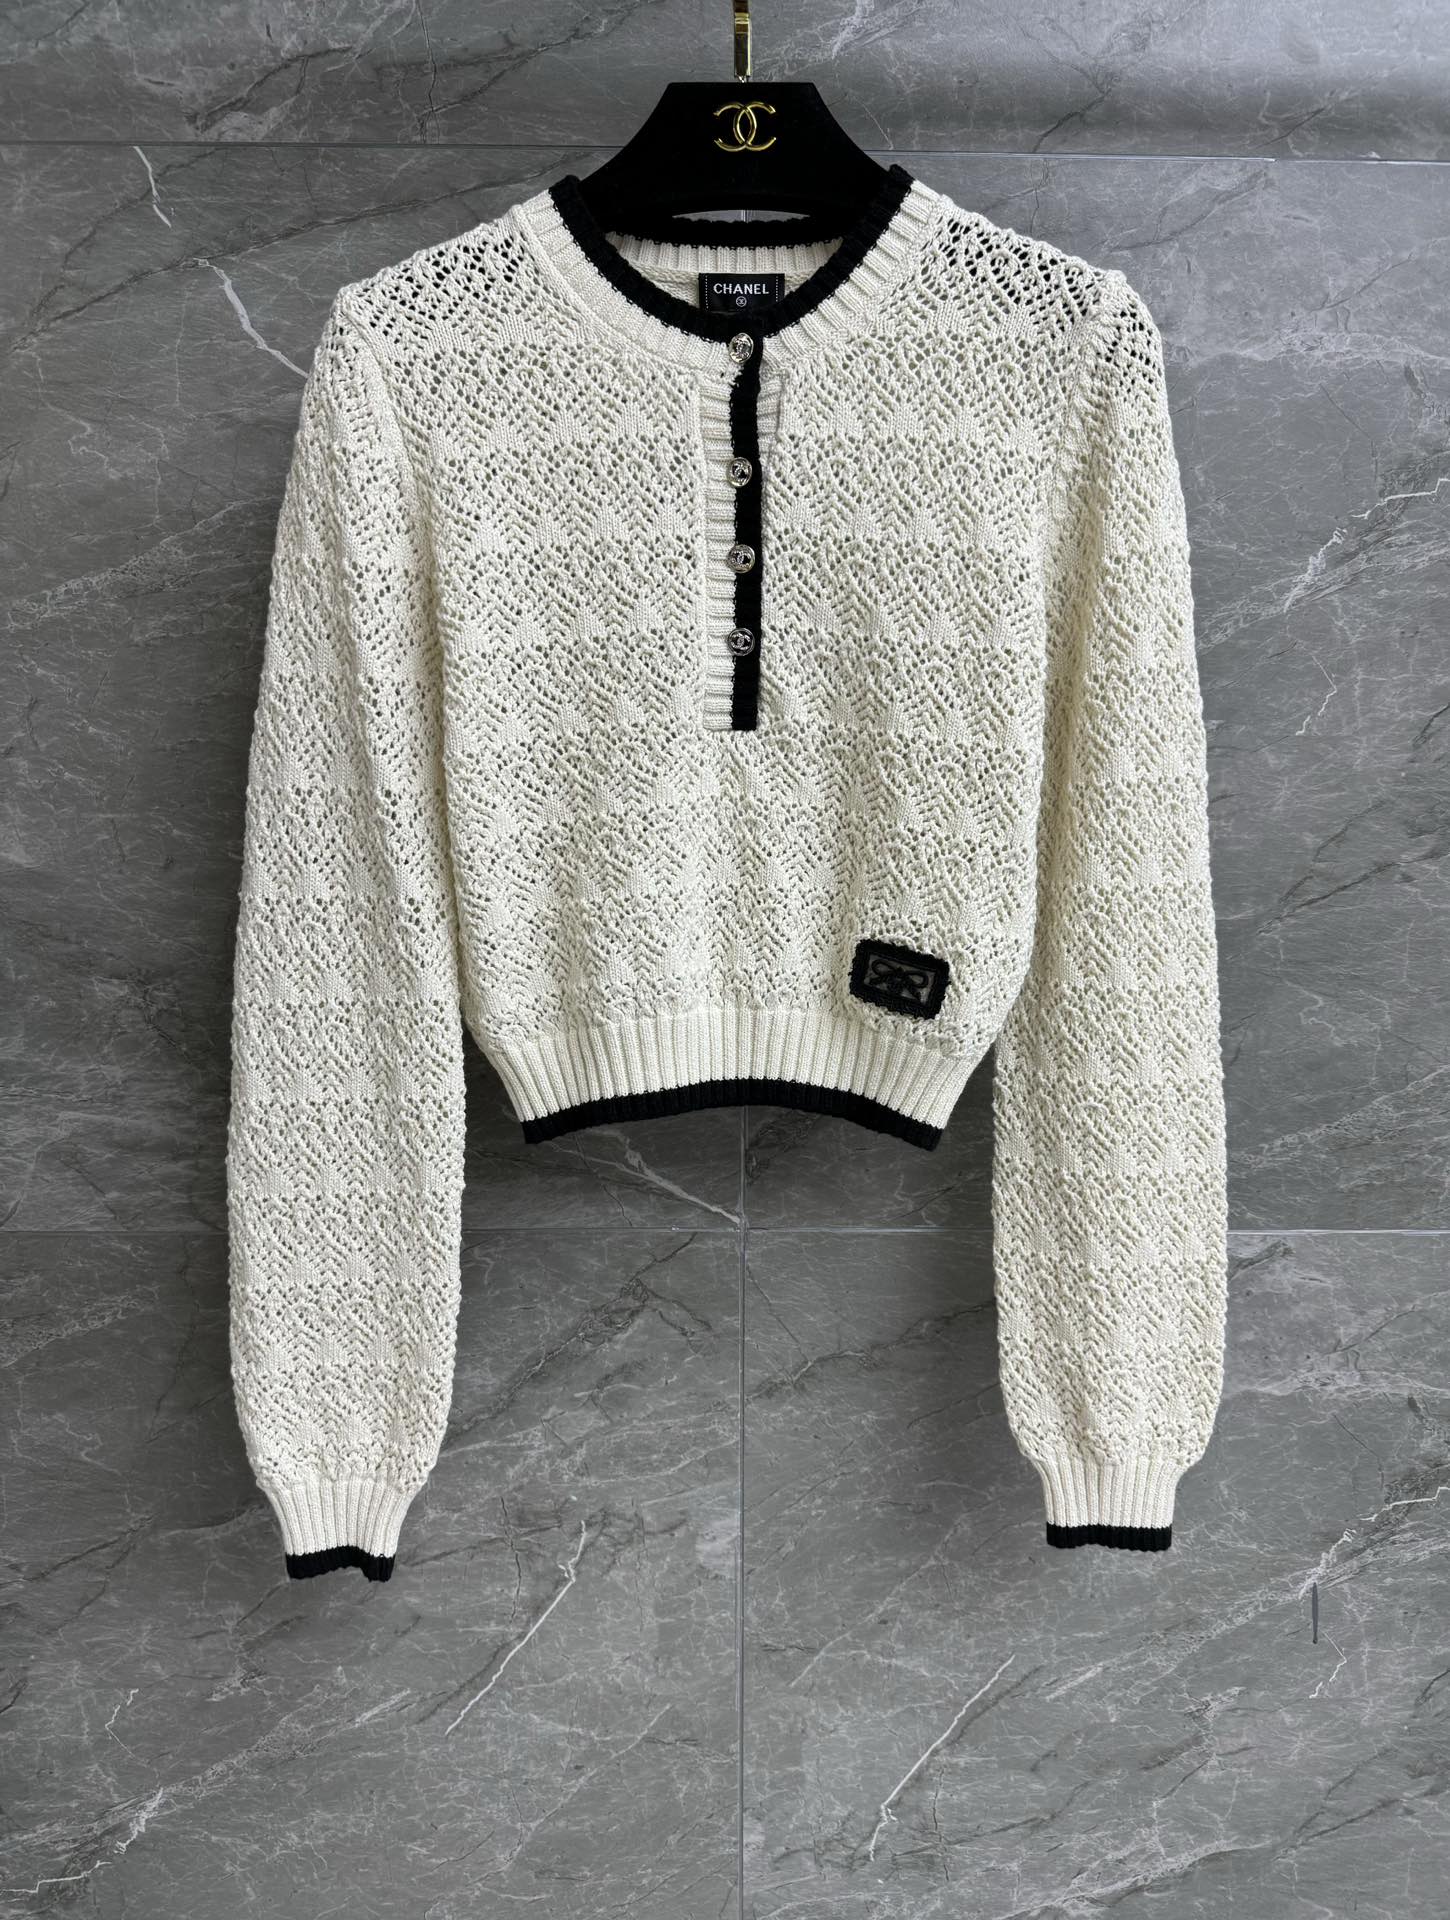 Chanel Clothing Sweatshirts Embroidery Cotton Lace Weave Spring/Summer Collection SML535320